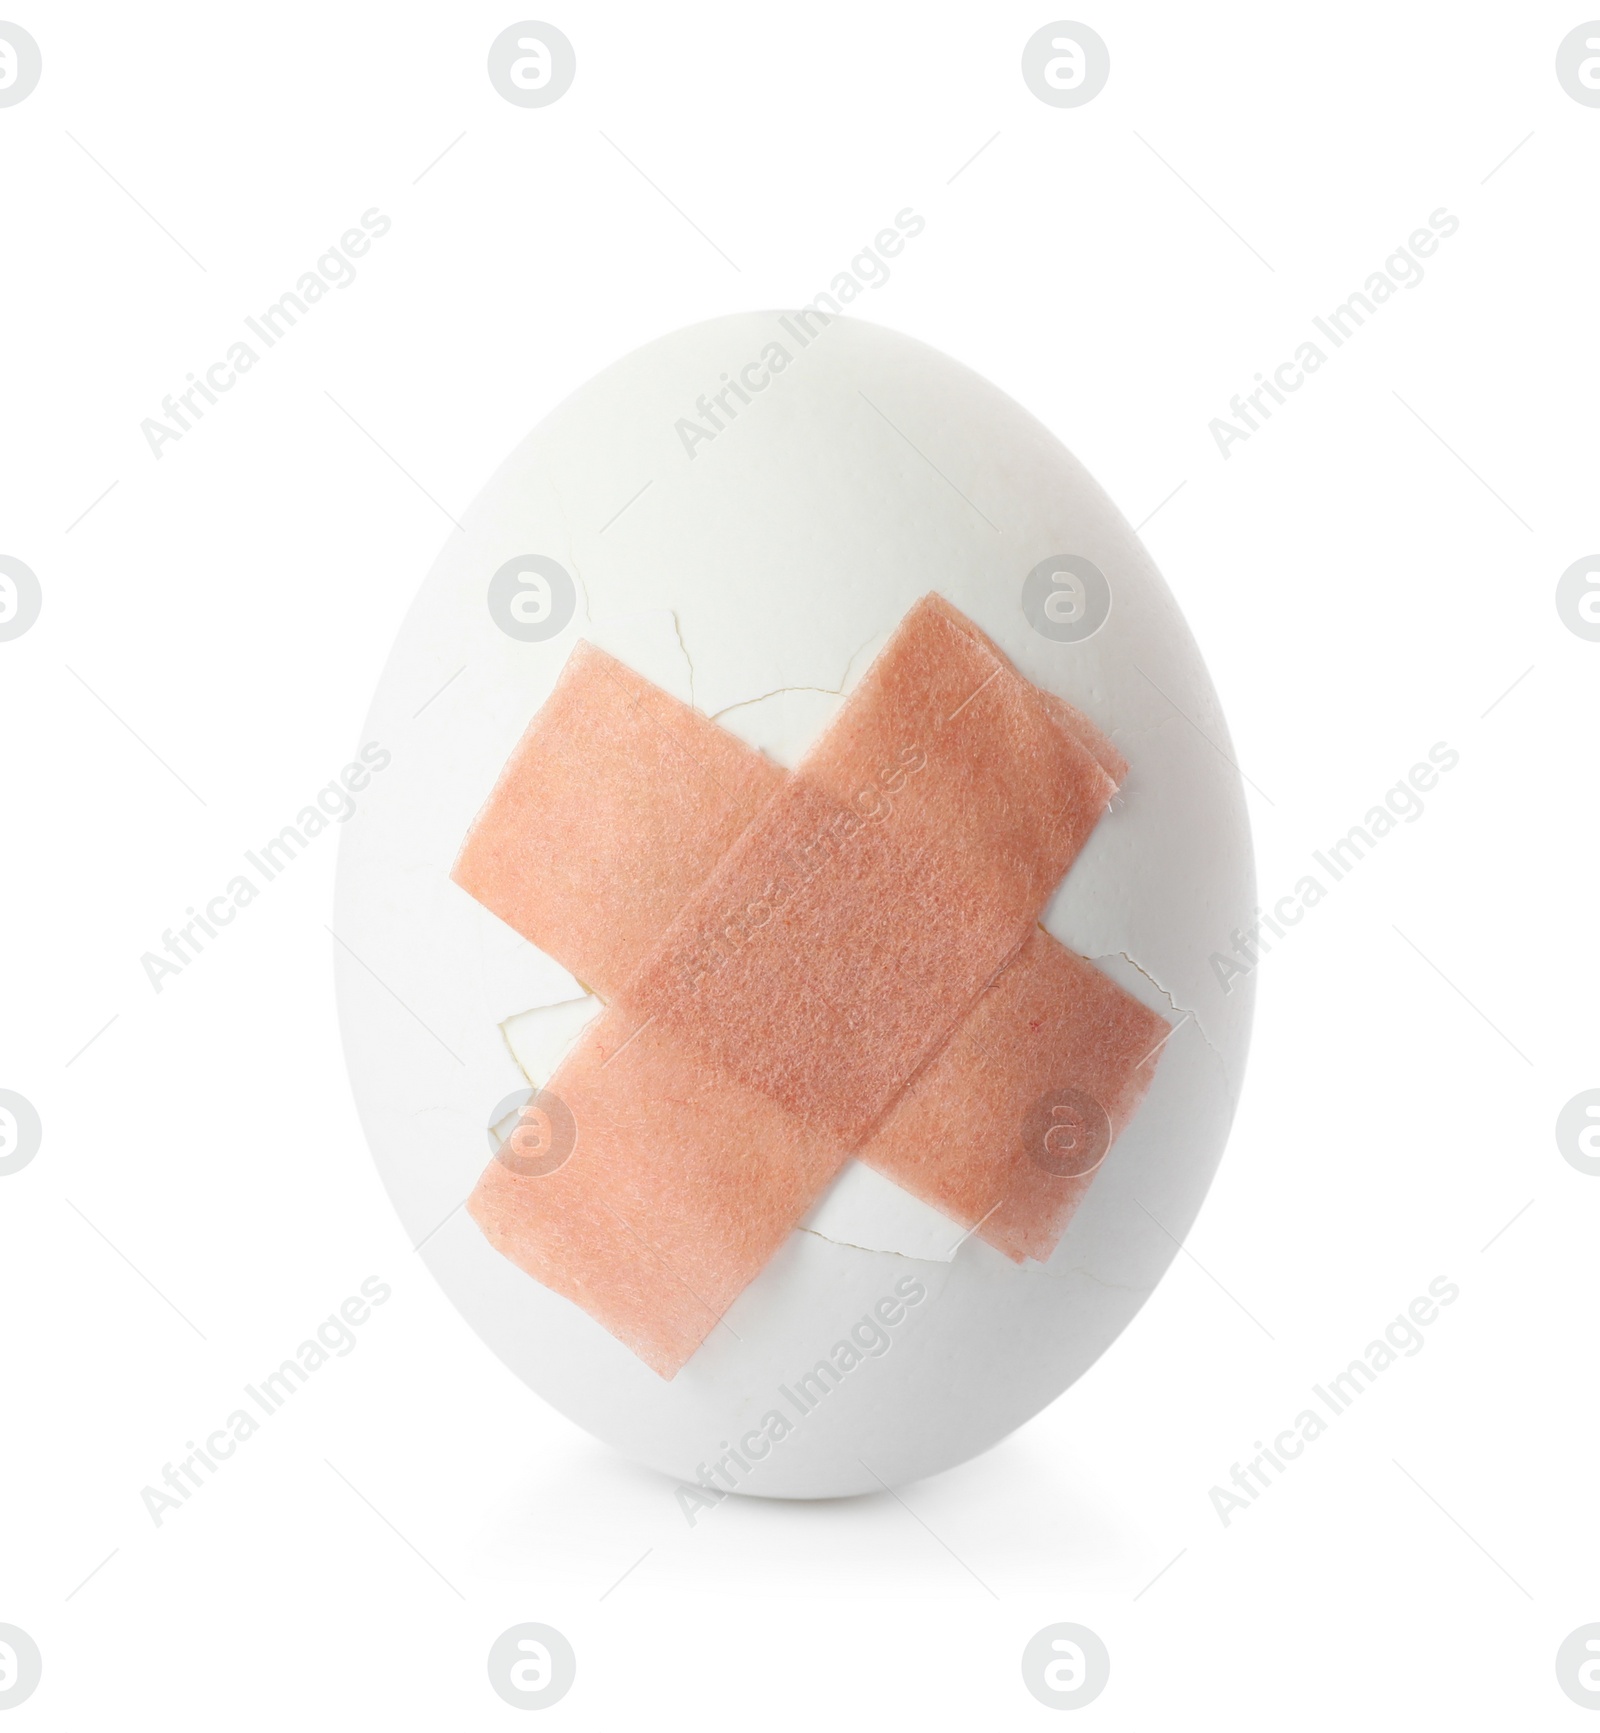 Photo of Cracked egg with sticking plasters isolated on white